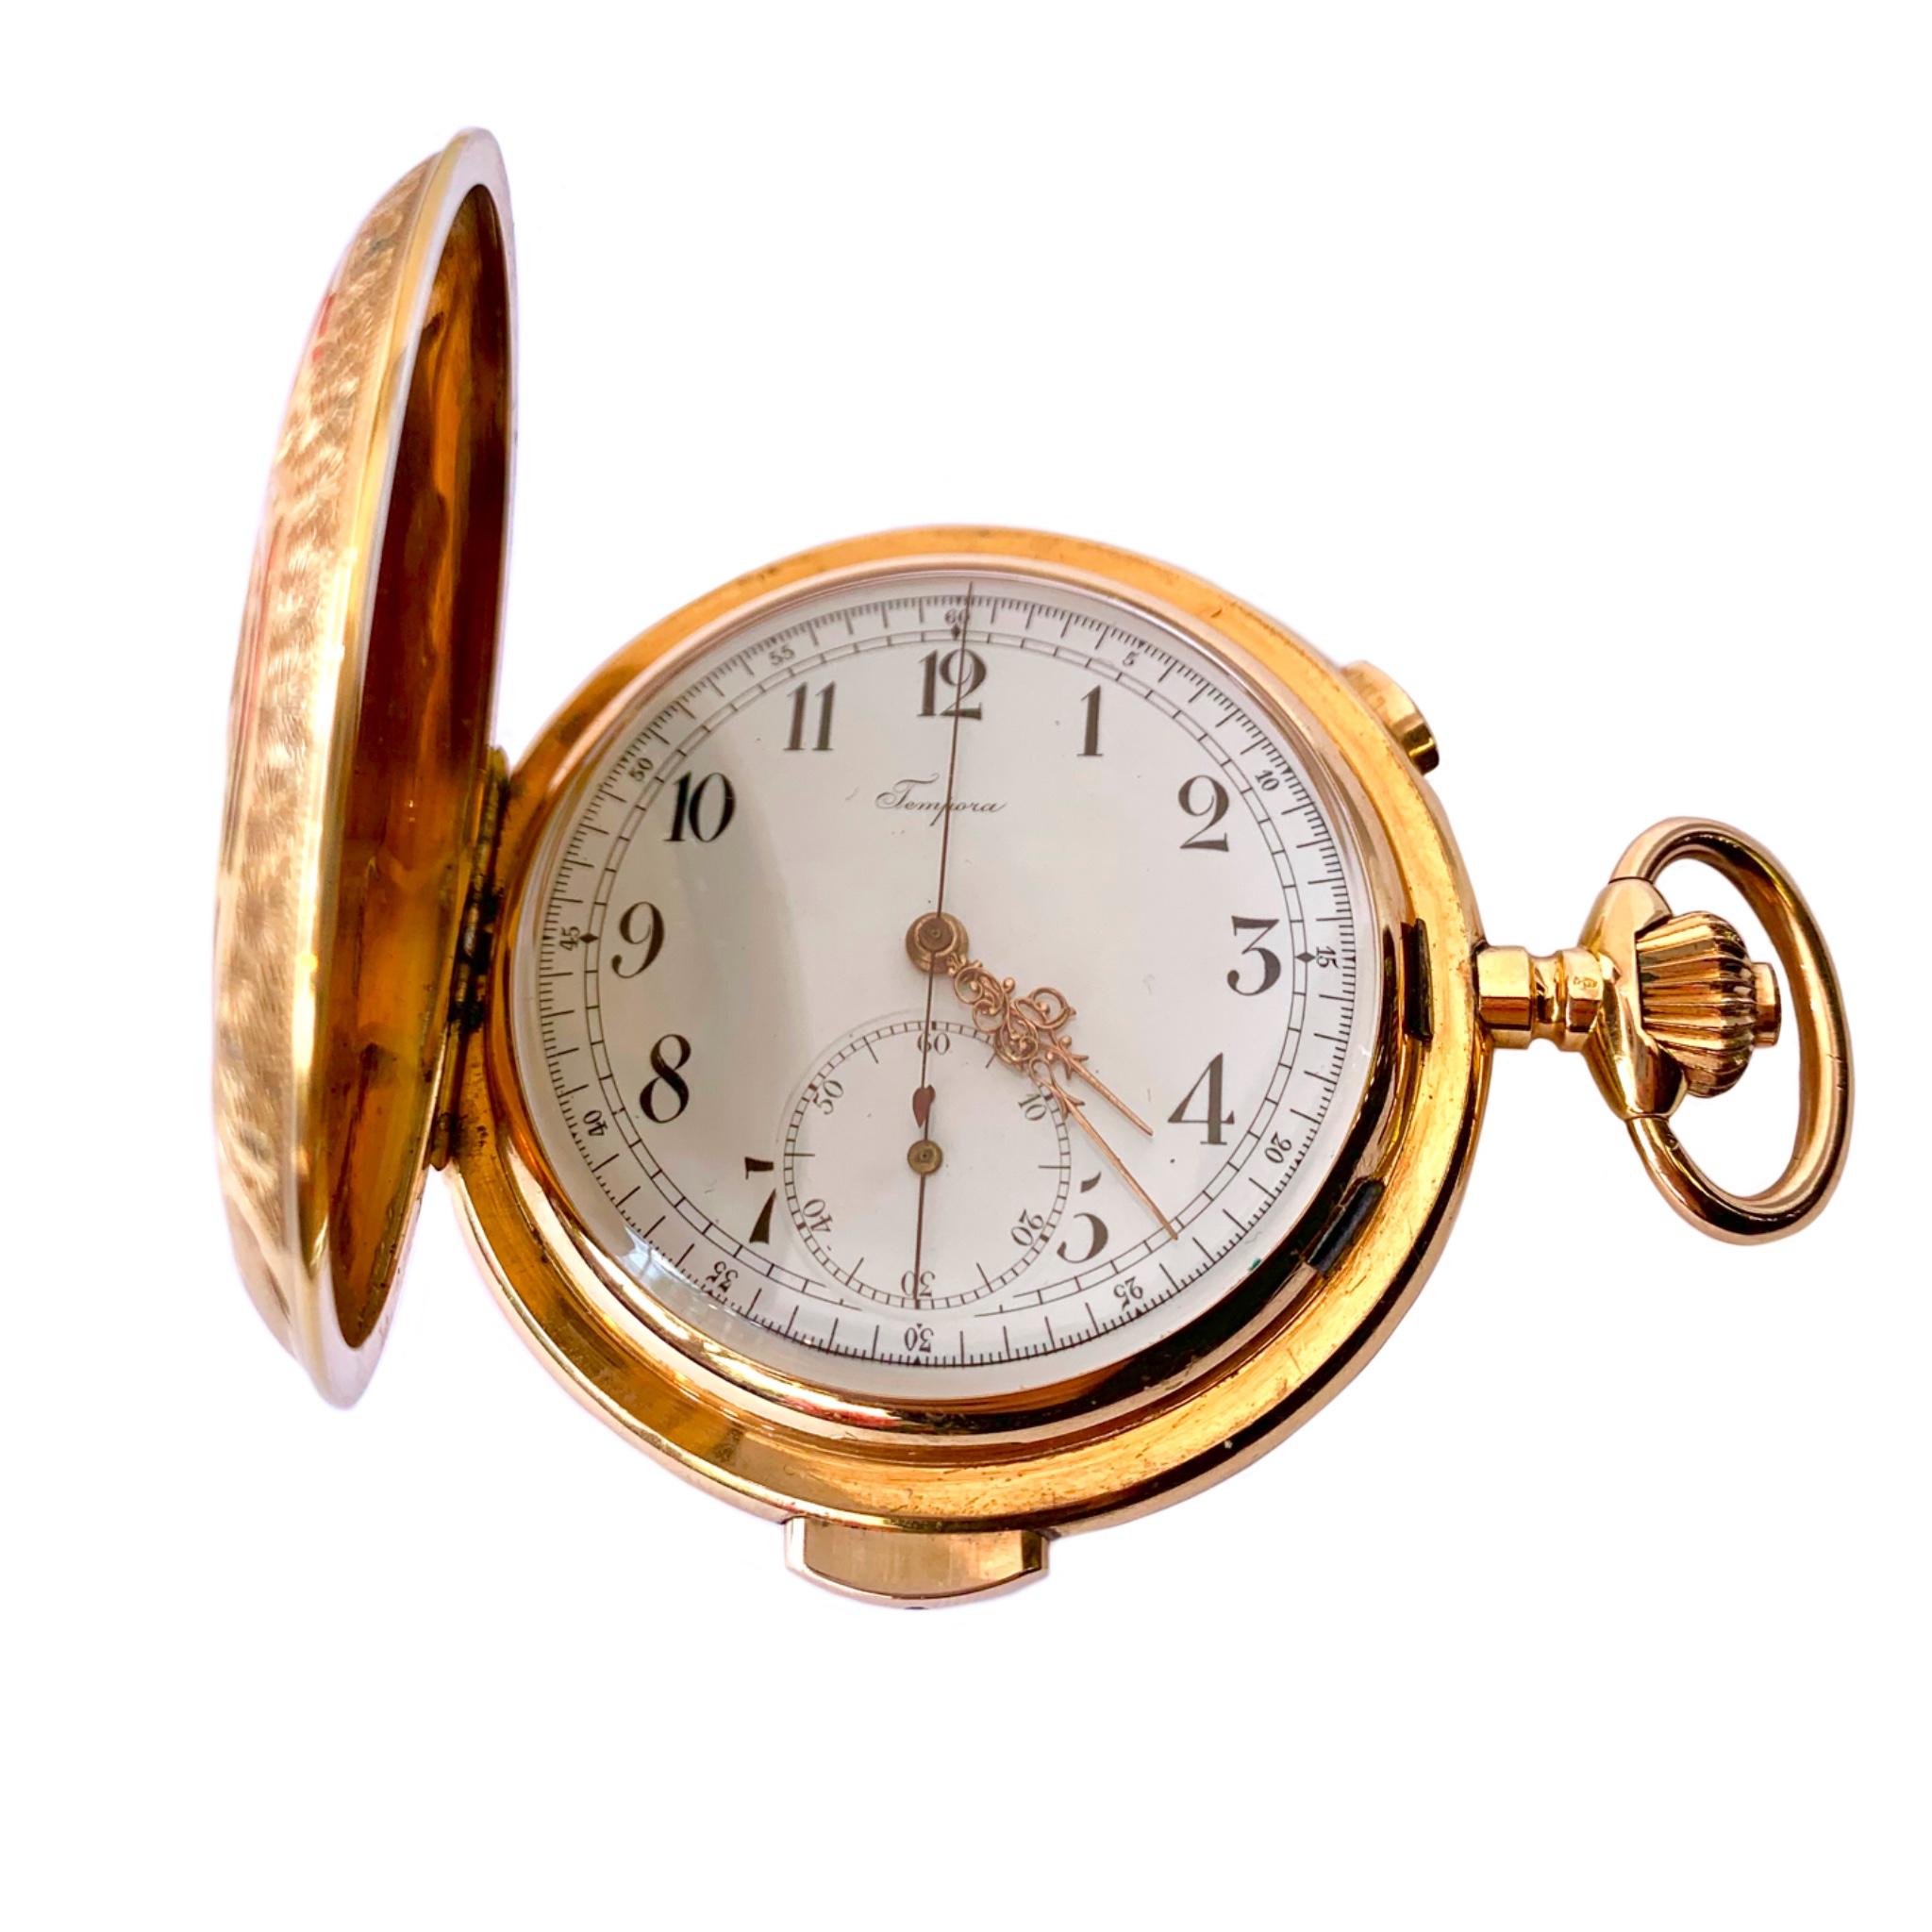 Collectors dream! 18K yellow gold Tempora hunting case engraved pocket watch. The repeater chronograph 25 jewel movement chimes the hours, quarter hours and minutes. The serial number is 13244, case #394042 and the case measures 57 mms. Circa early